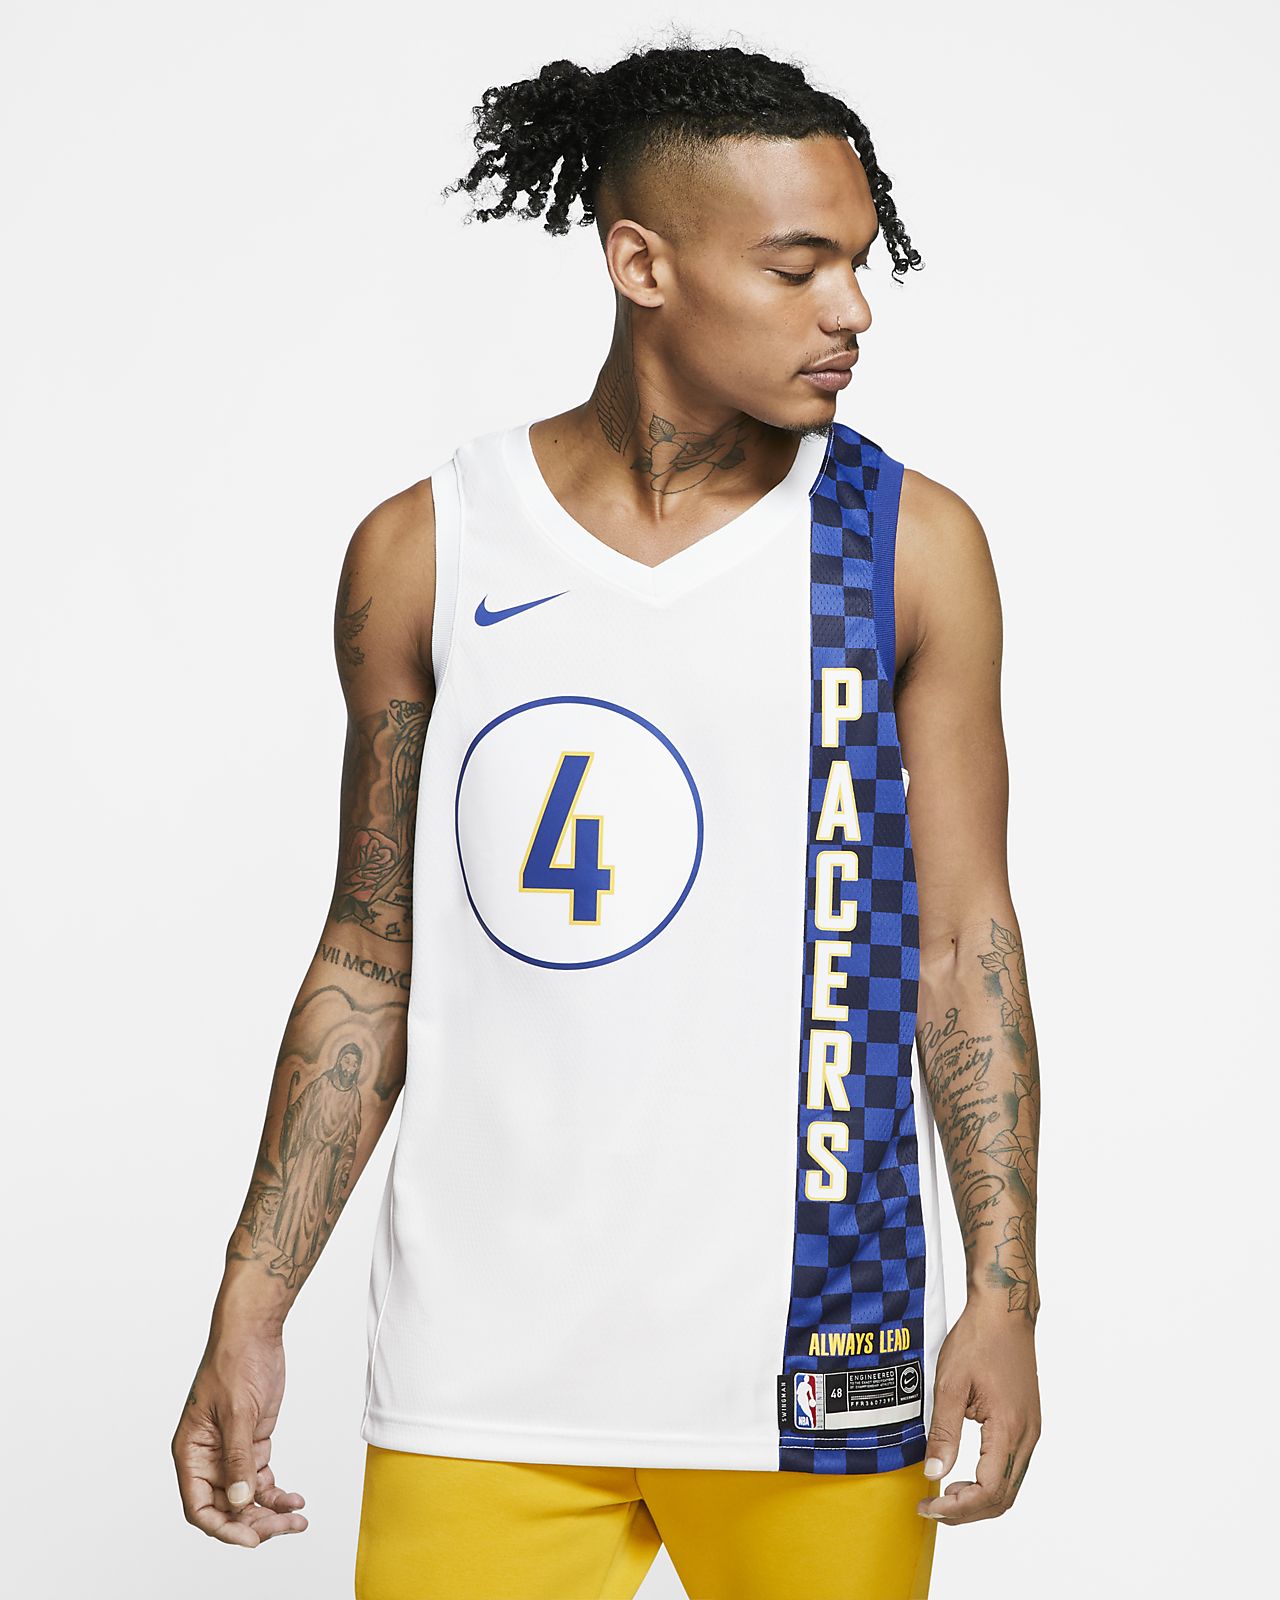 pacers city edition jersey